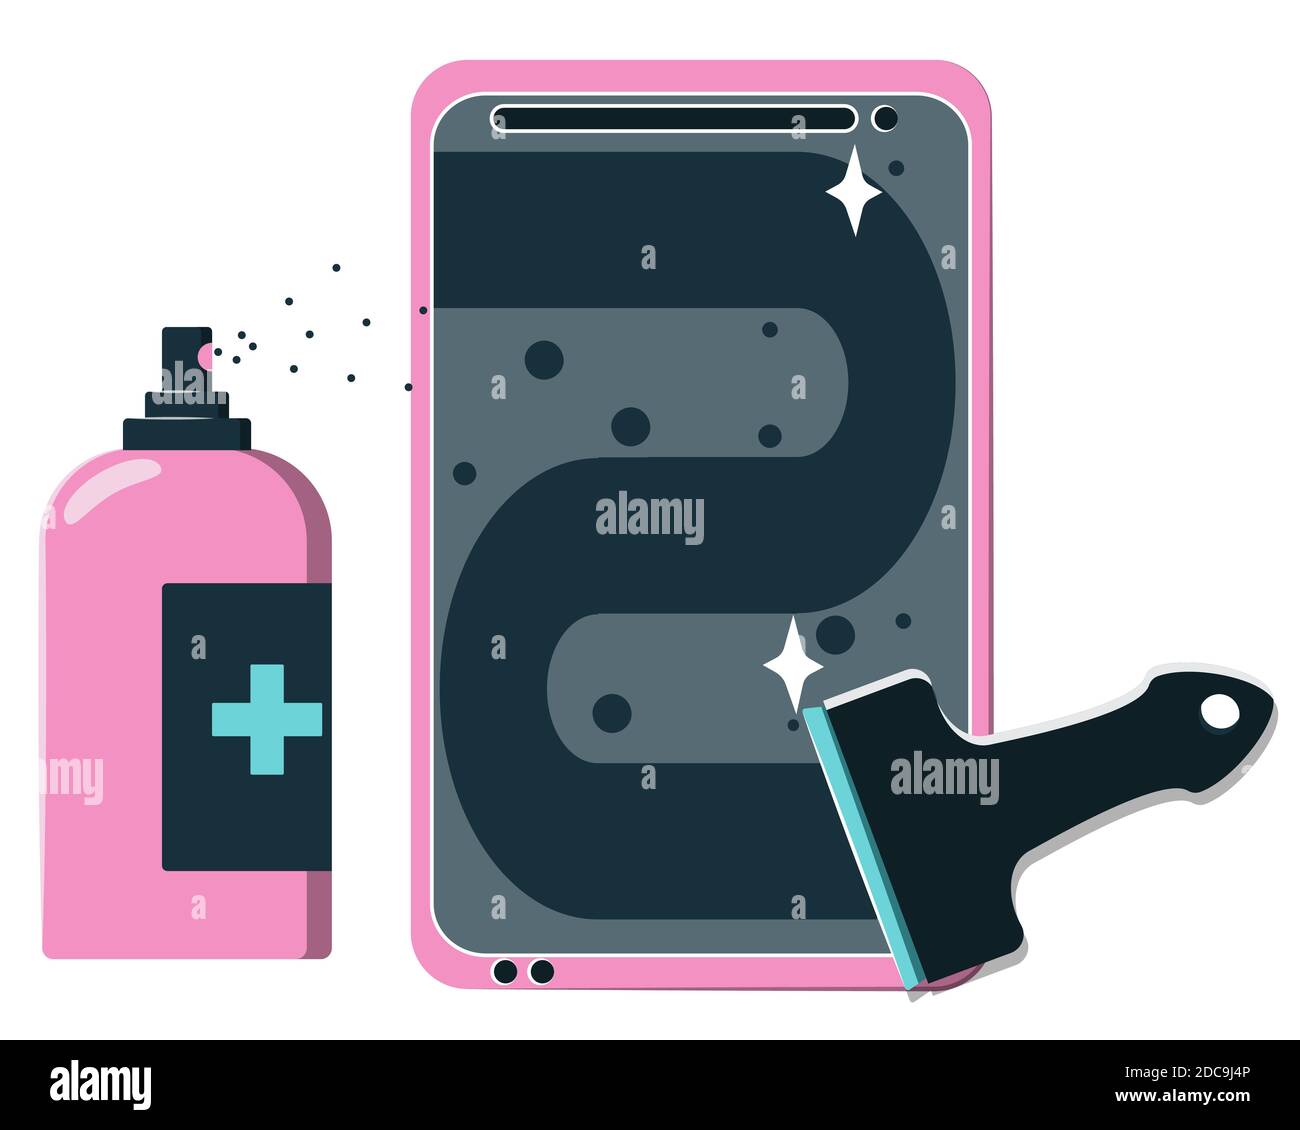 Smartphone desinfection concept bright illustration. Alcohol sanitizer spray, clean mobile touch screen, scraper. Flat cartoon isolated vector. Virus prevention hygienic rules. Keep gadget bacteries free and safe. Stock Vector